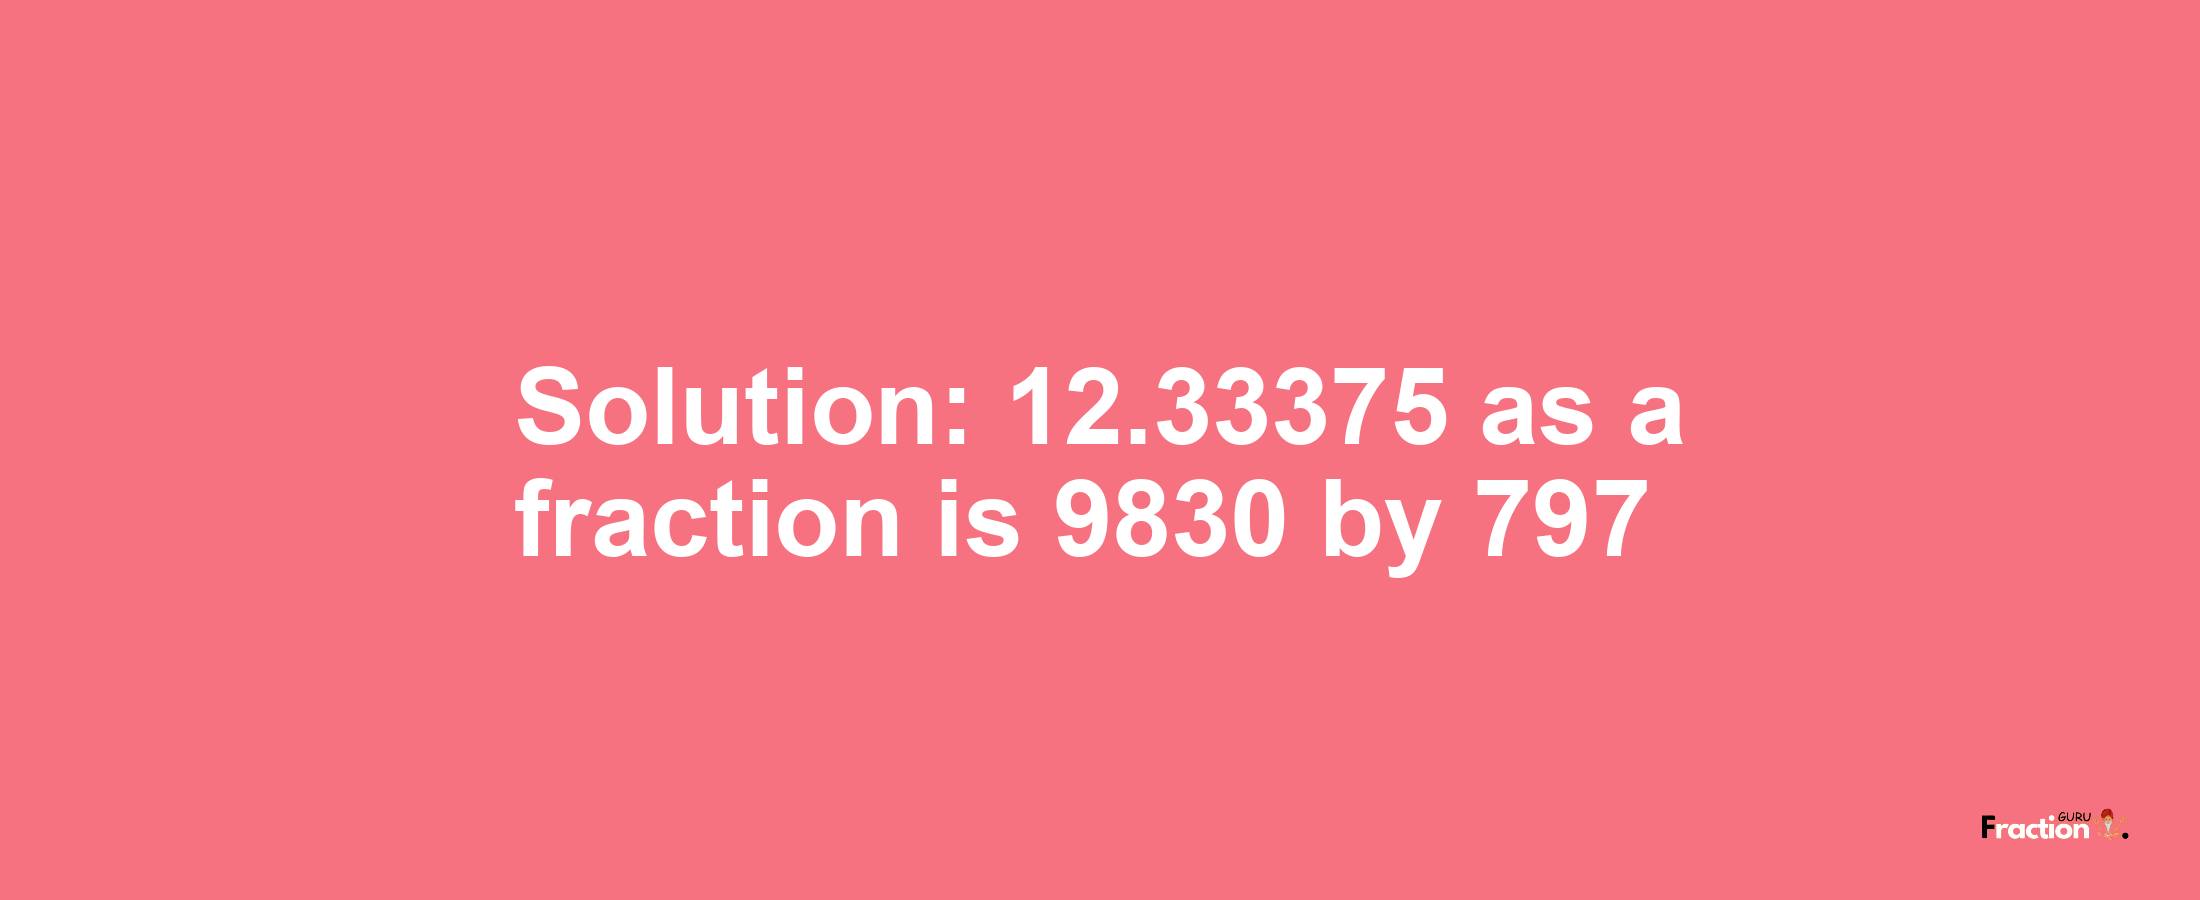 Solution:12.33375 as a fraction is 9830/797